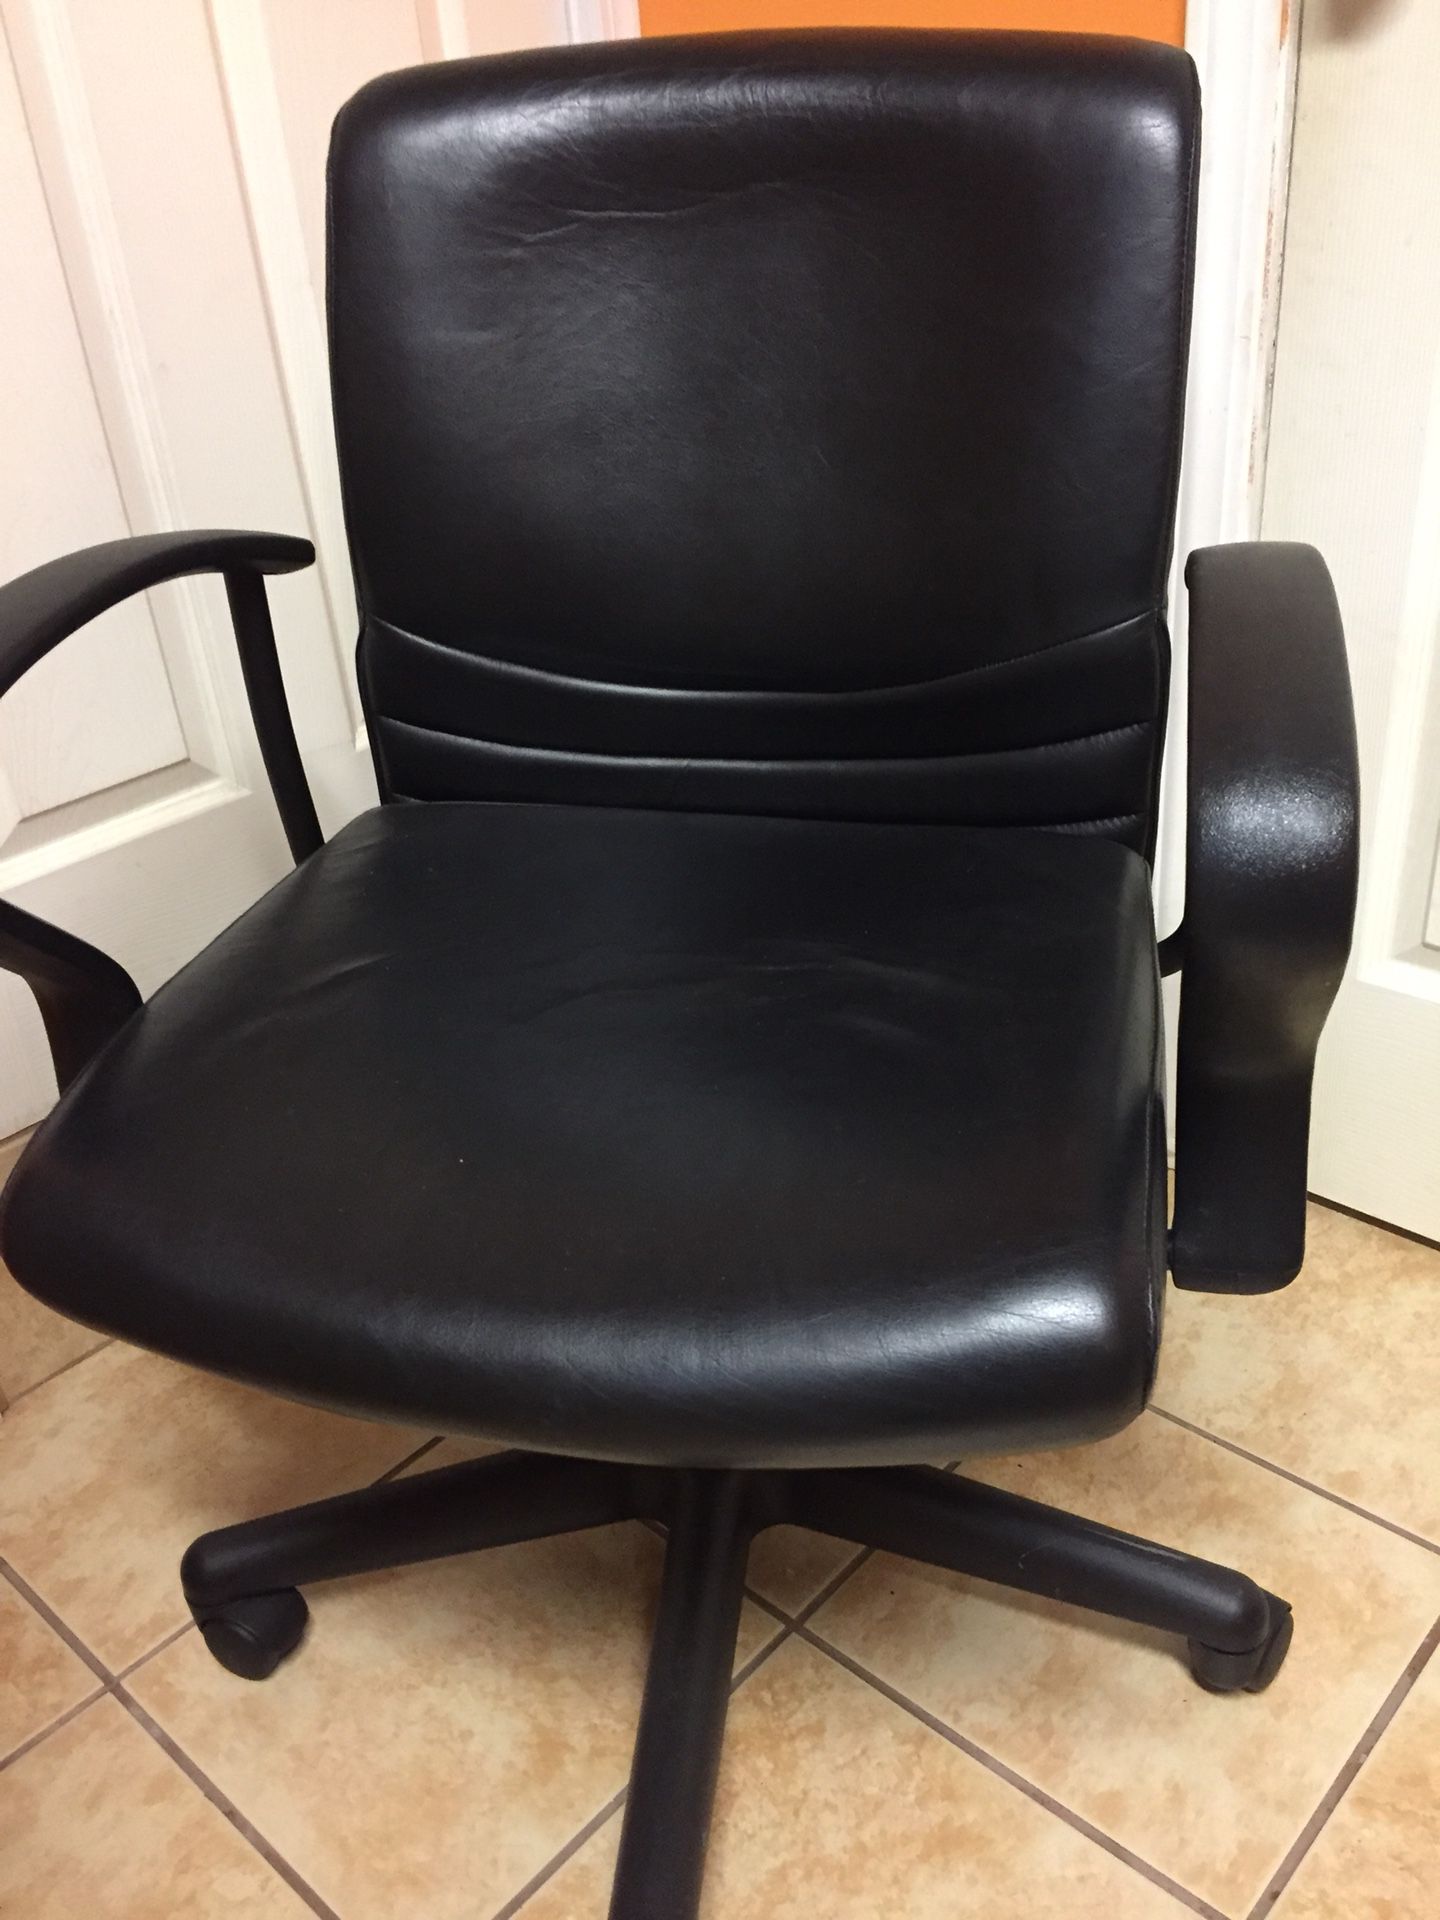 Office chair adjustable very comfortable to seat 💺